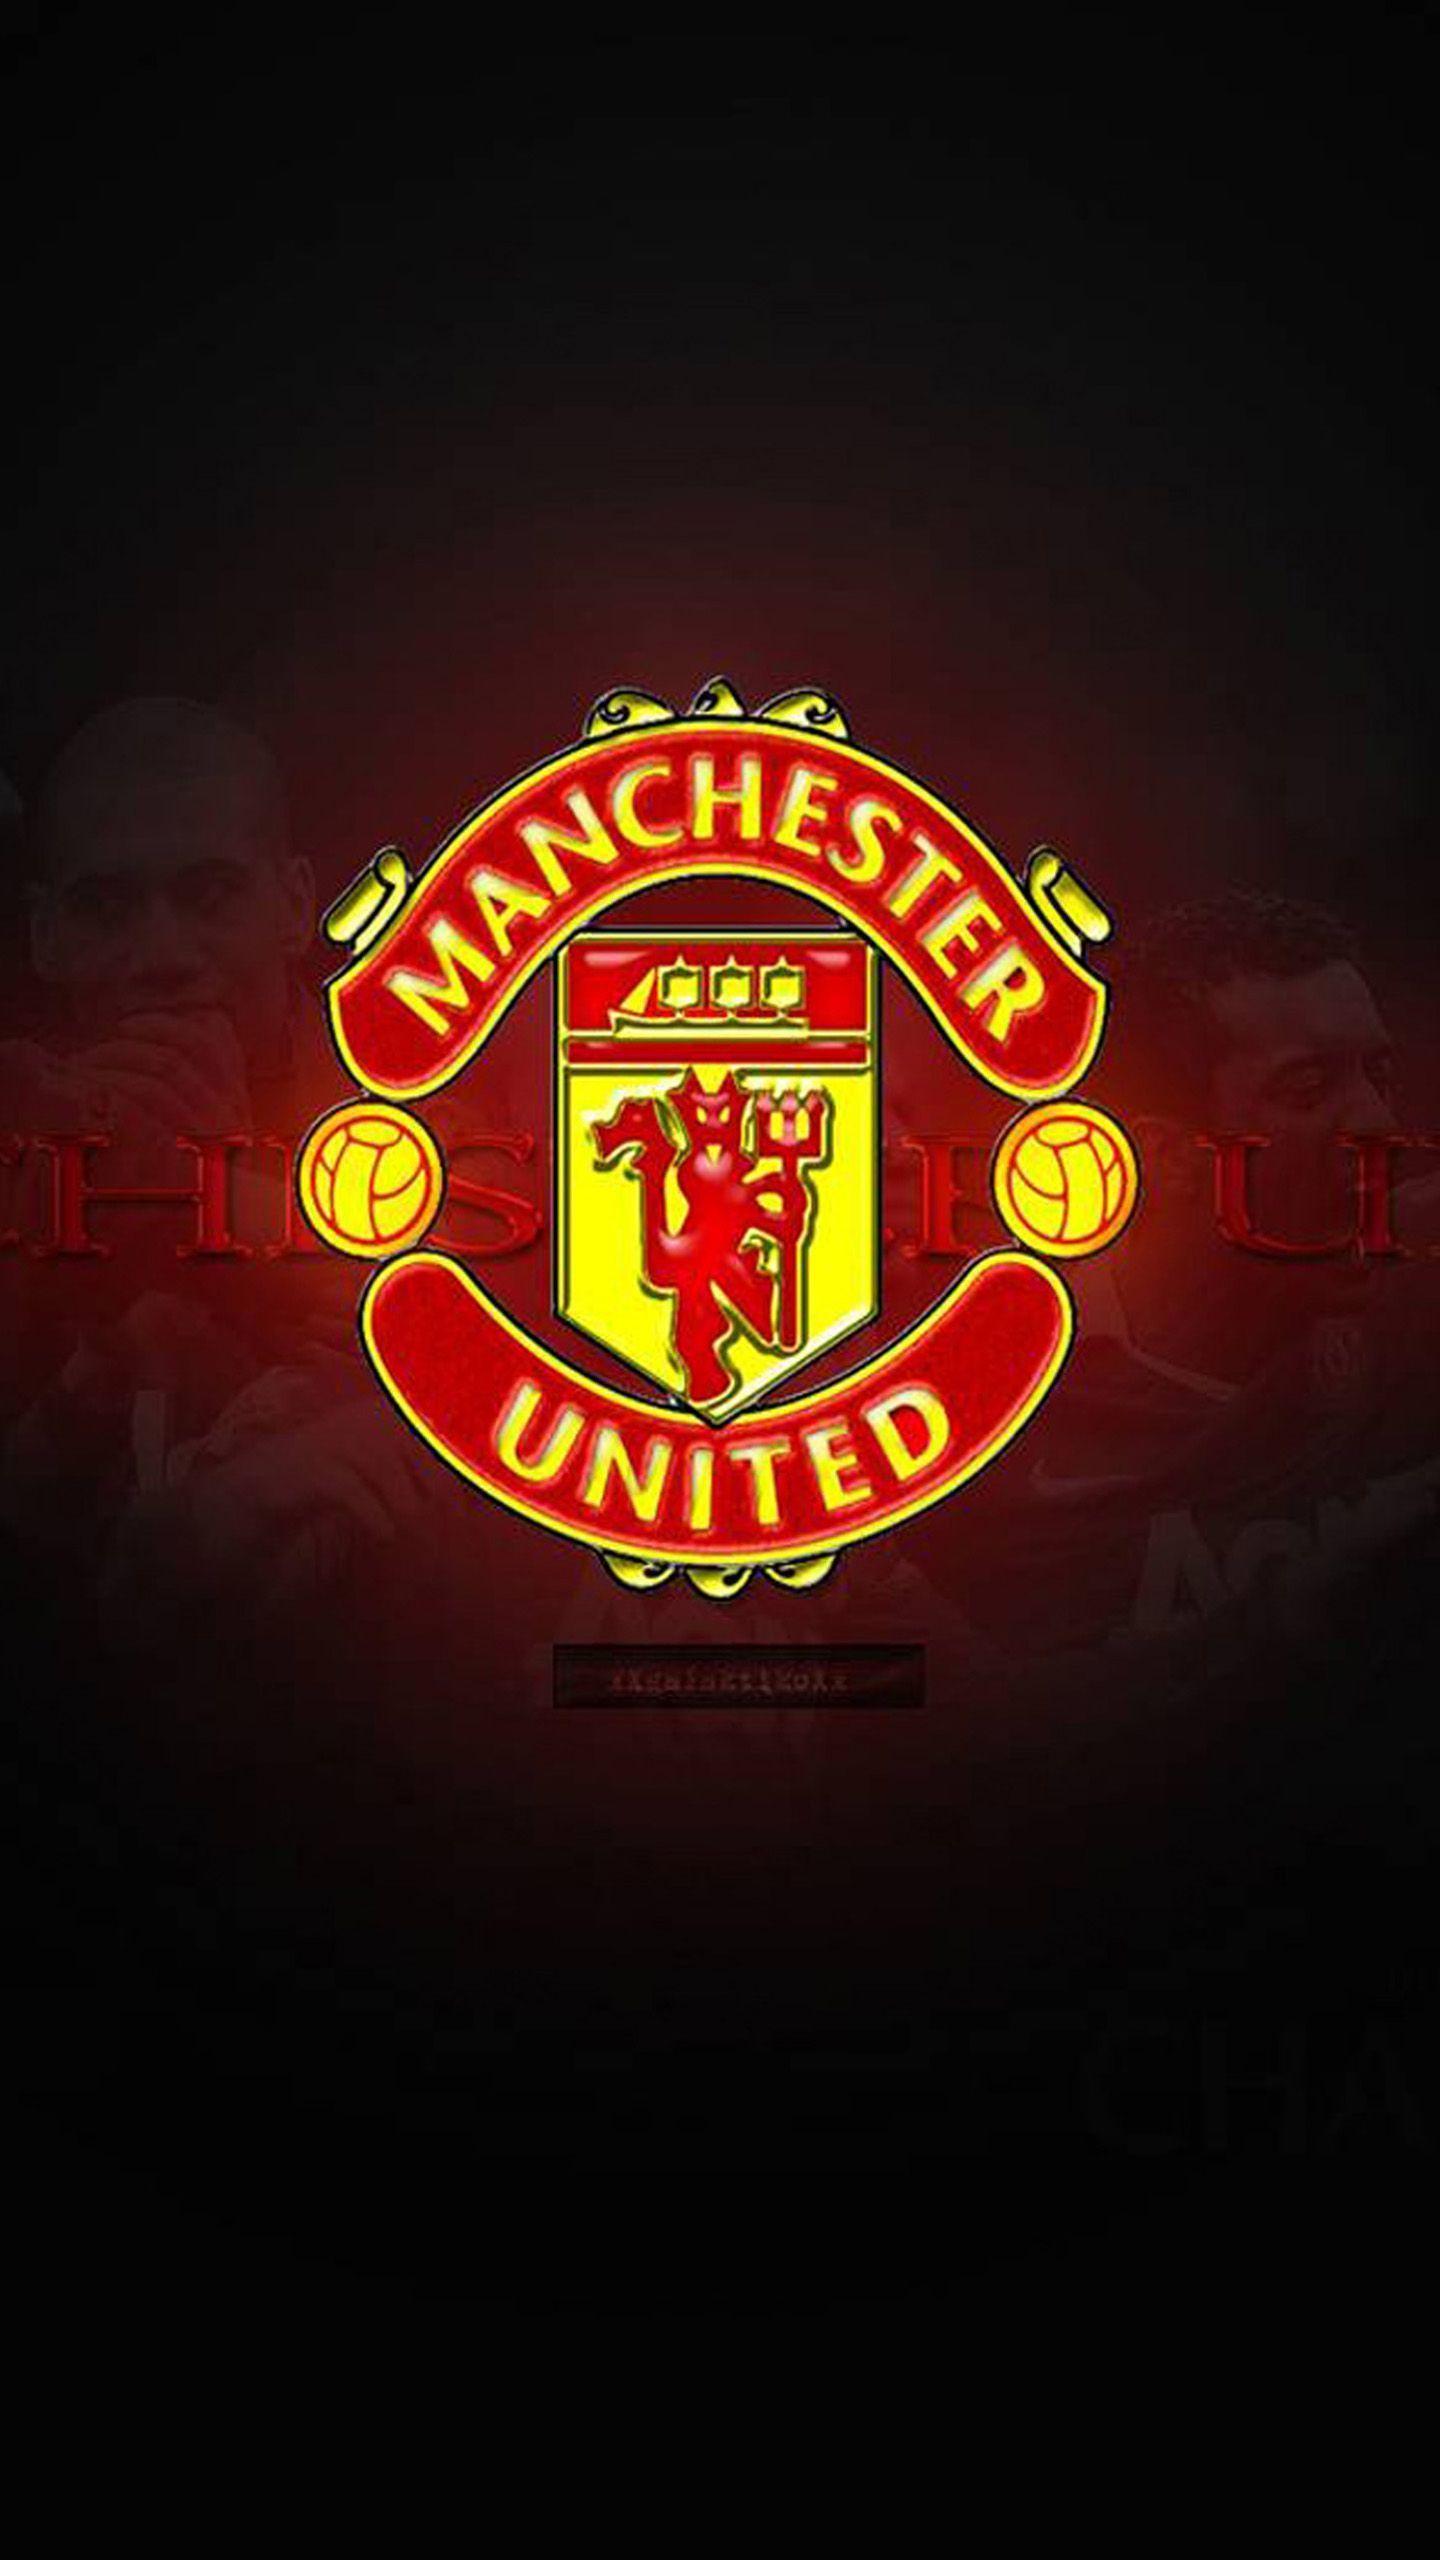 Manchester United Background Wallpapers - Wallpaper - #1 Source for ...